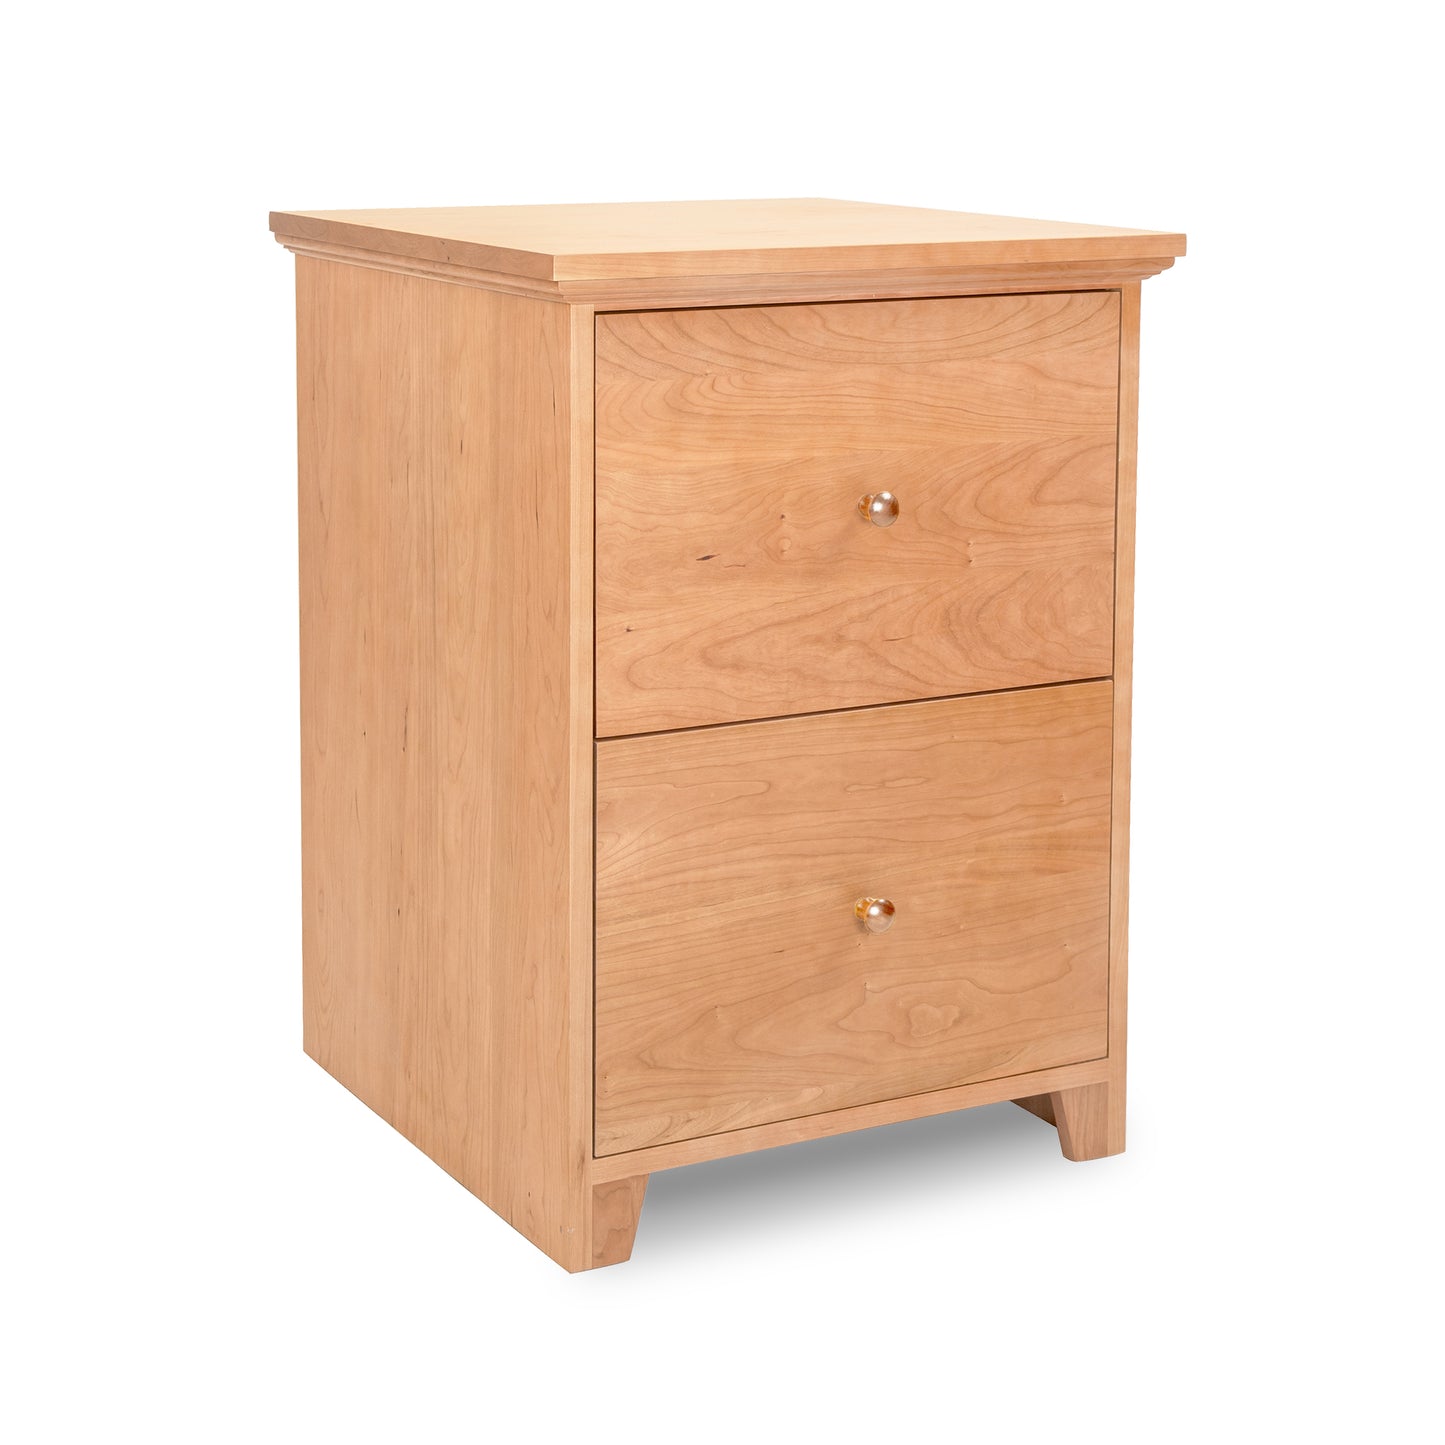 A small Lyndon Furniture Shaker 2-Drawer Vertical File Cabinet, made of cherry wood.